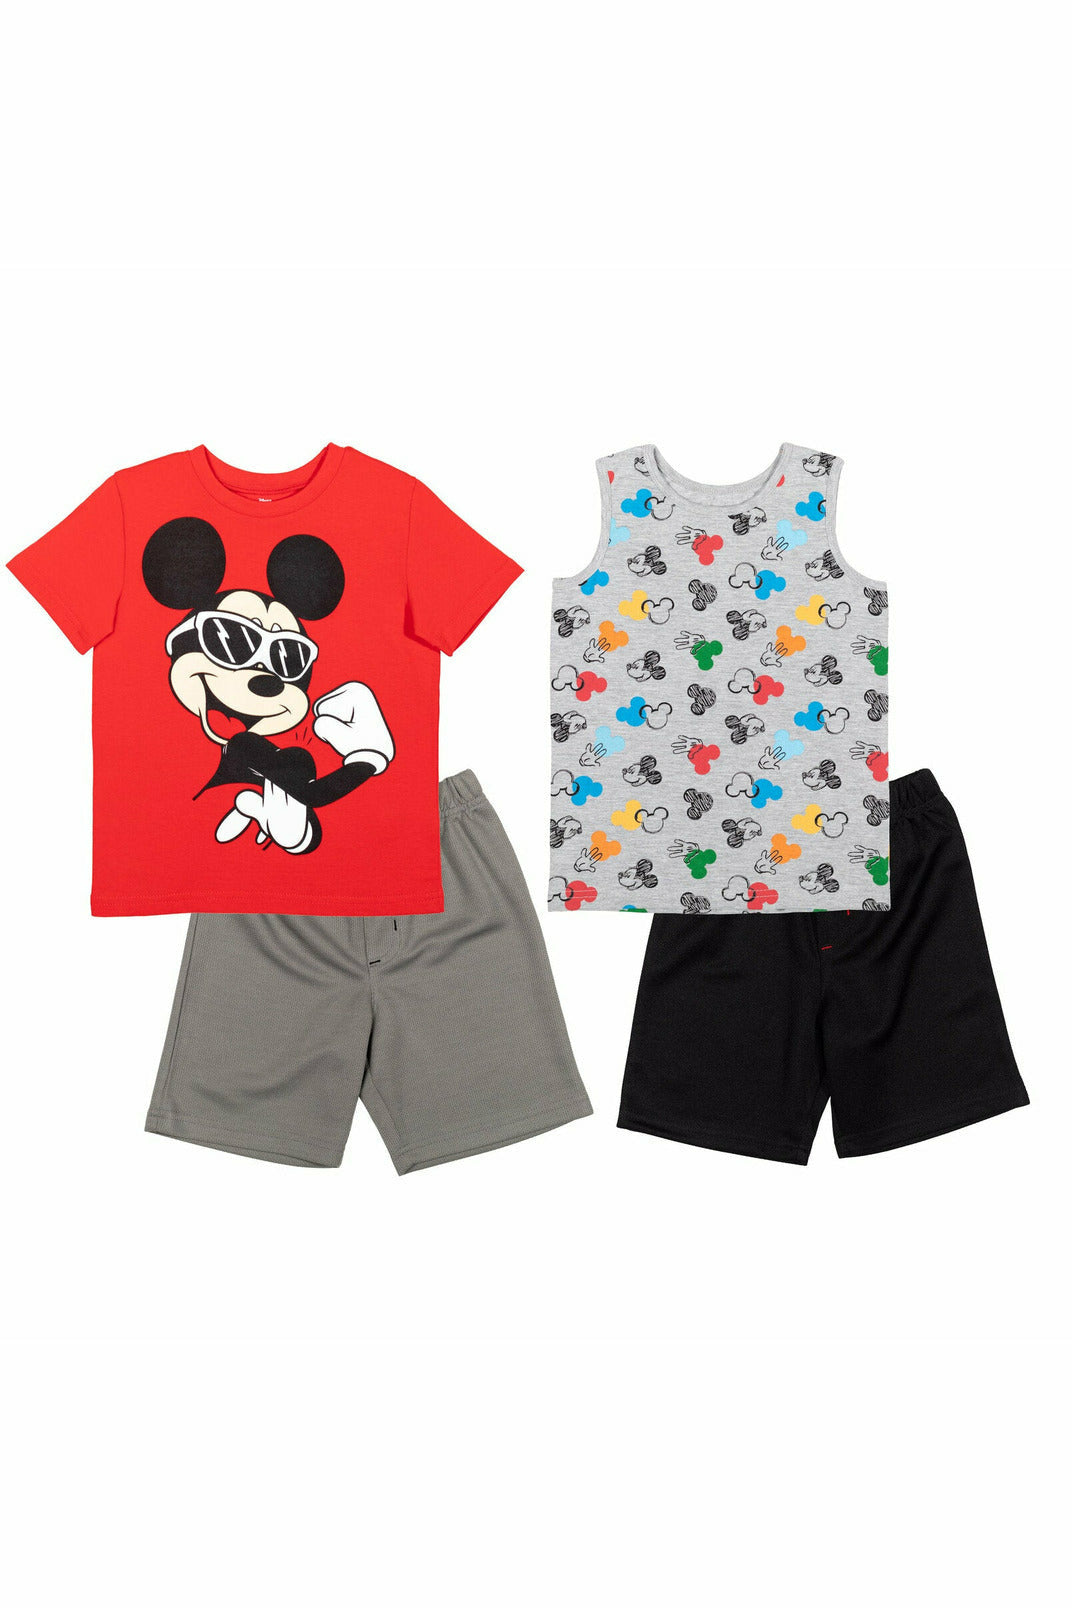 Mickey Mouse 3 Piece Outfit Set: T-Shirt Shorts